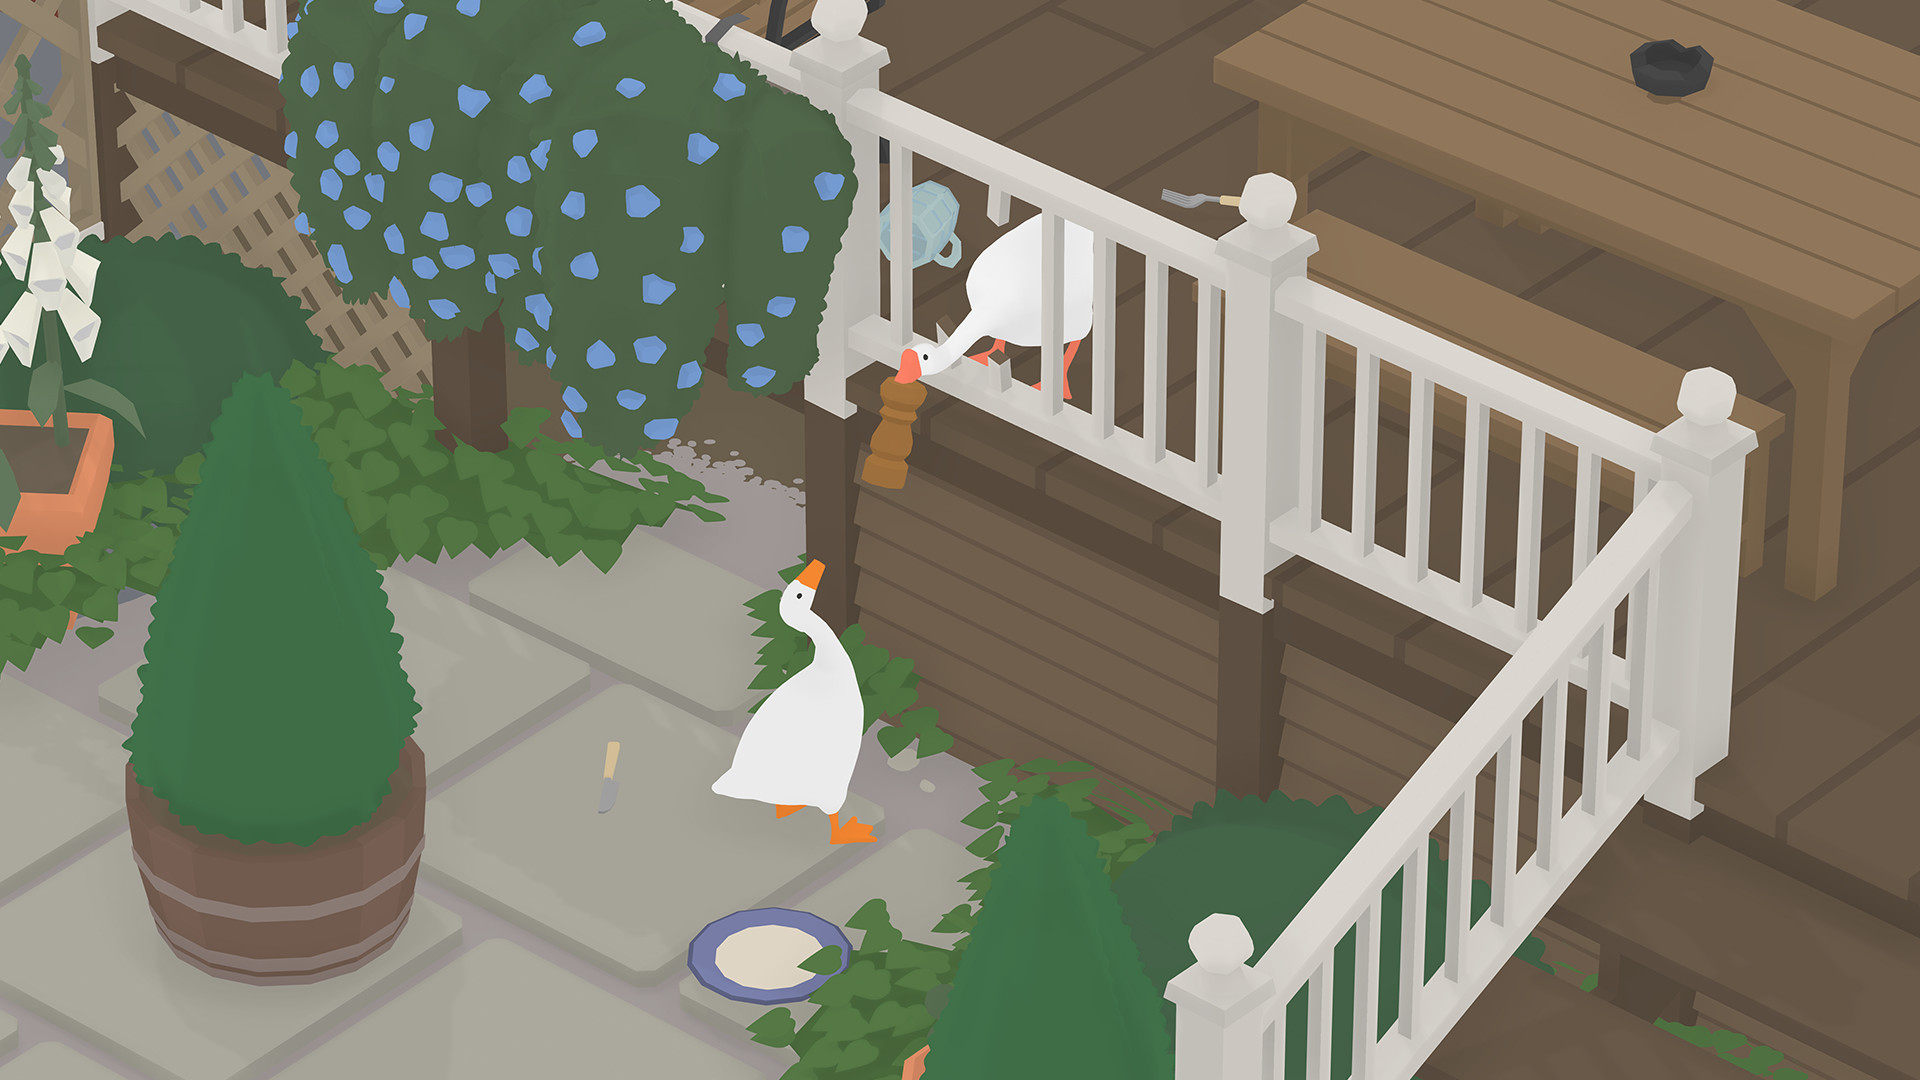 One horrible goose with something in its mouth, craning its neck over a banister towards another horrible goose, in Untitled Goose Game.